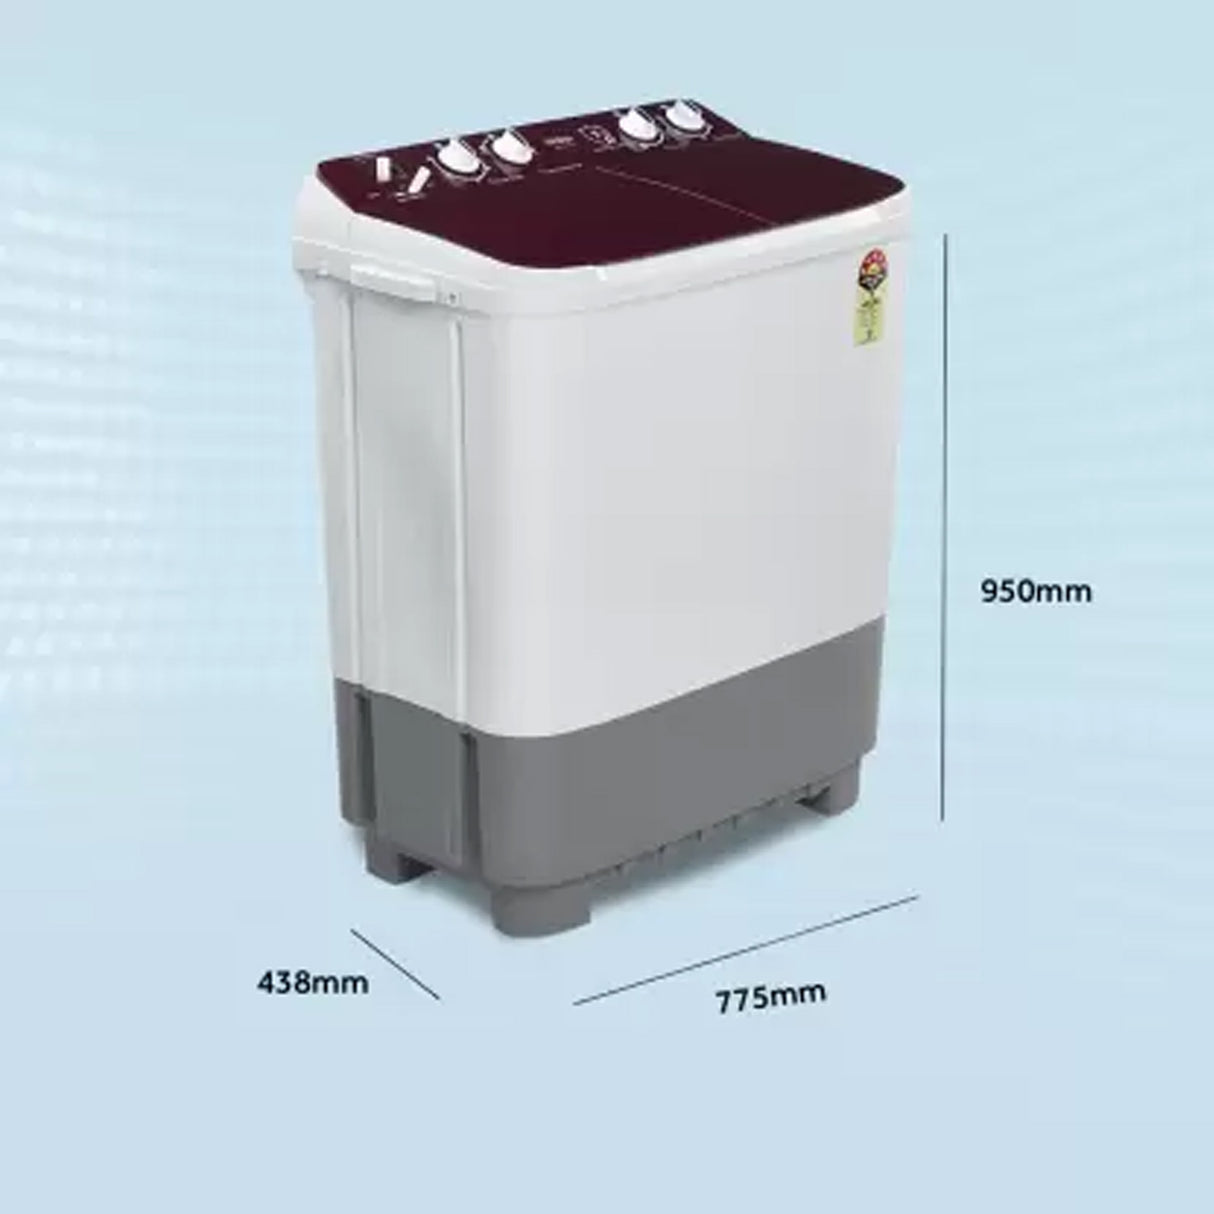 Laundry Companion - Haier Semi-Automatic, 7.5 kg, adds vibrancy to your laundry routine.